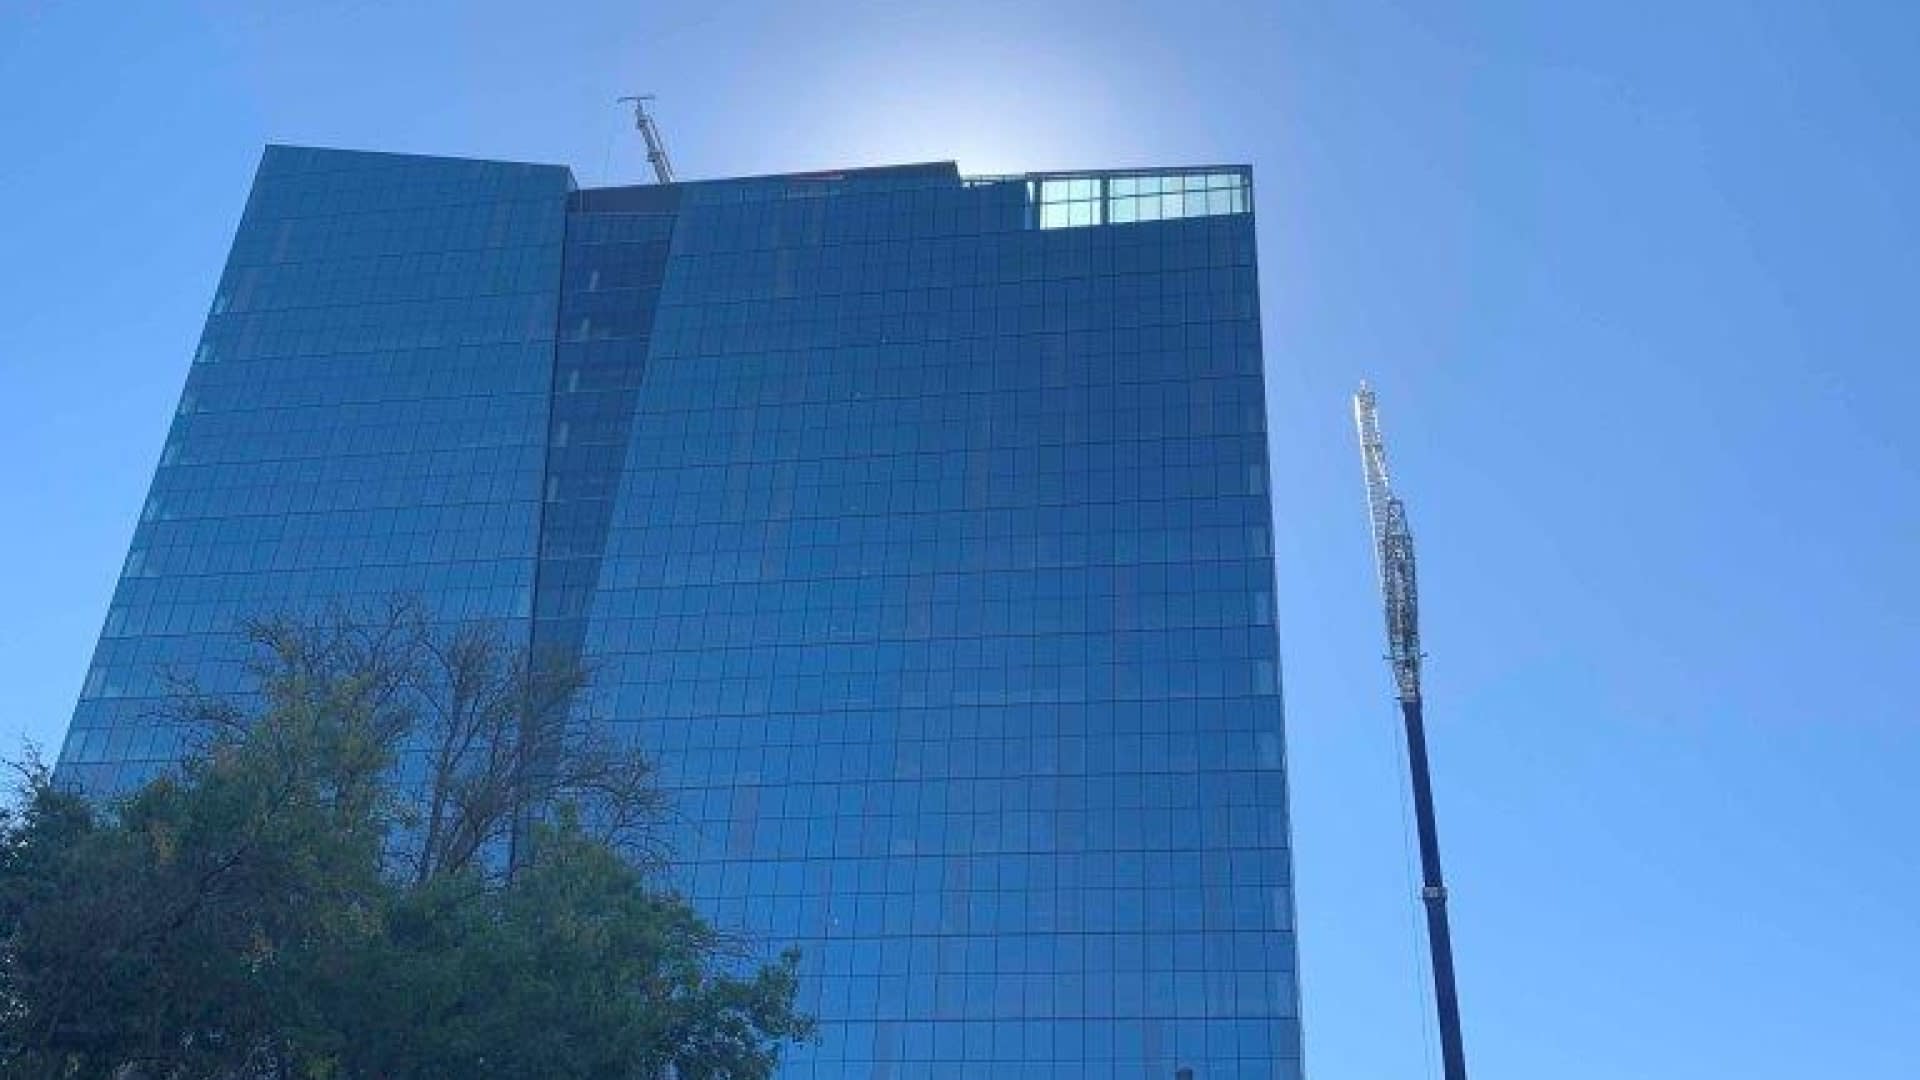 Low angle shot of glass mirrored building with the sun behind it